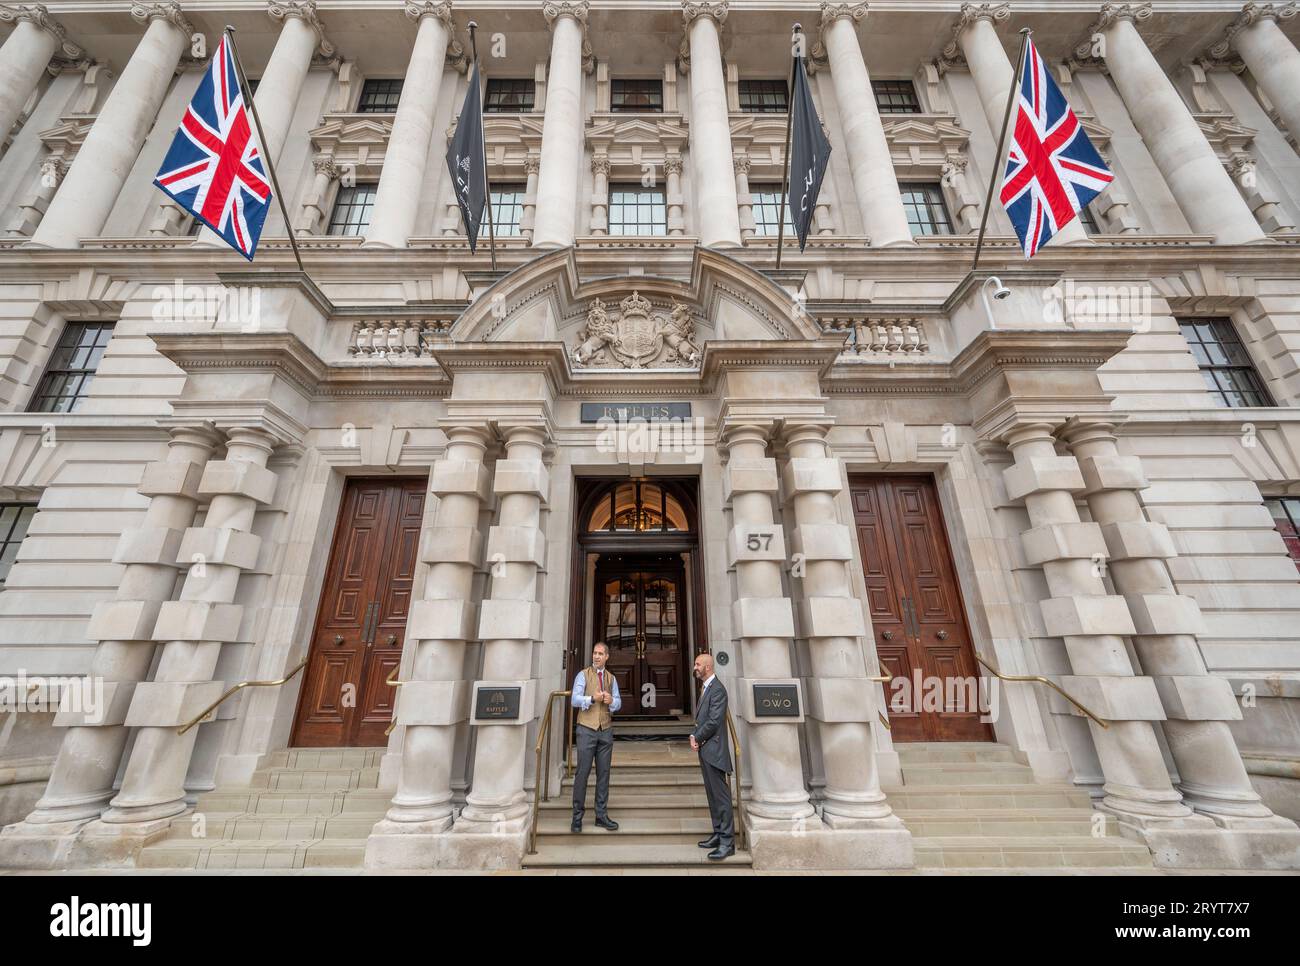 57 Whitehall, London, UK. Raffles London hotel at The OWO (Old War Office) opened on 29th September after a major renovation. Raffles is part of Accor. Credit: Malcolm Park/Alamy Live News Stock Photo